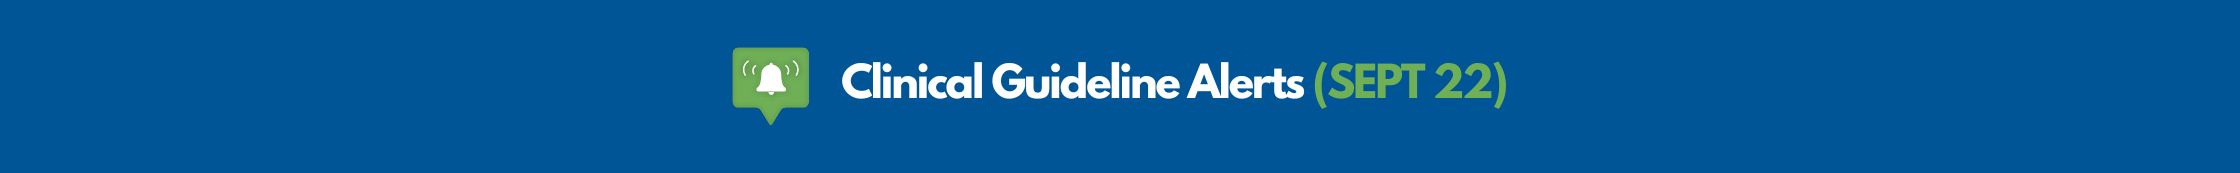 Clinical Guideline Alerts (SEPT 22)